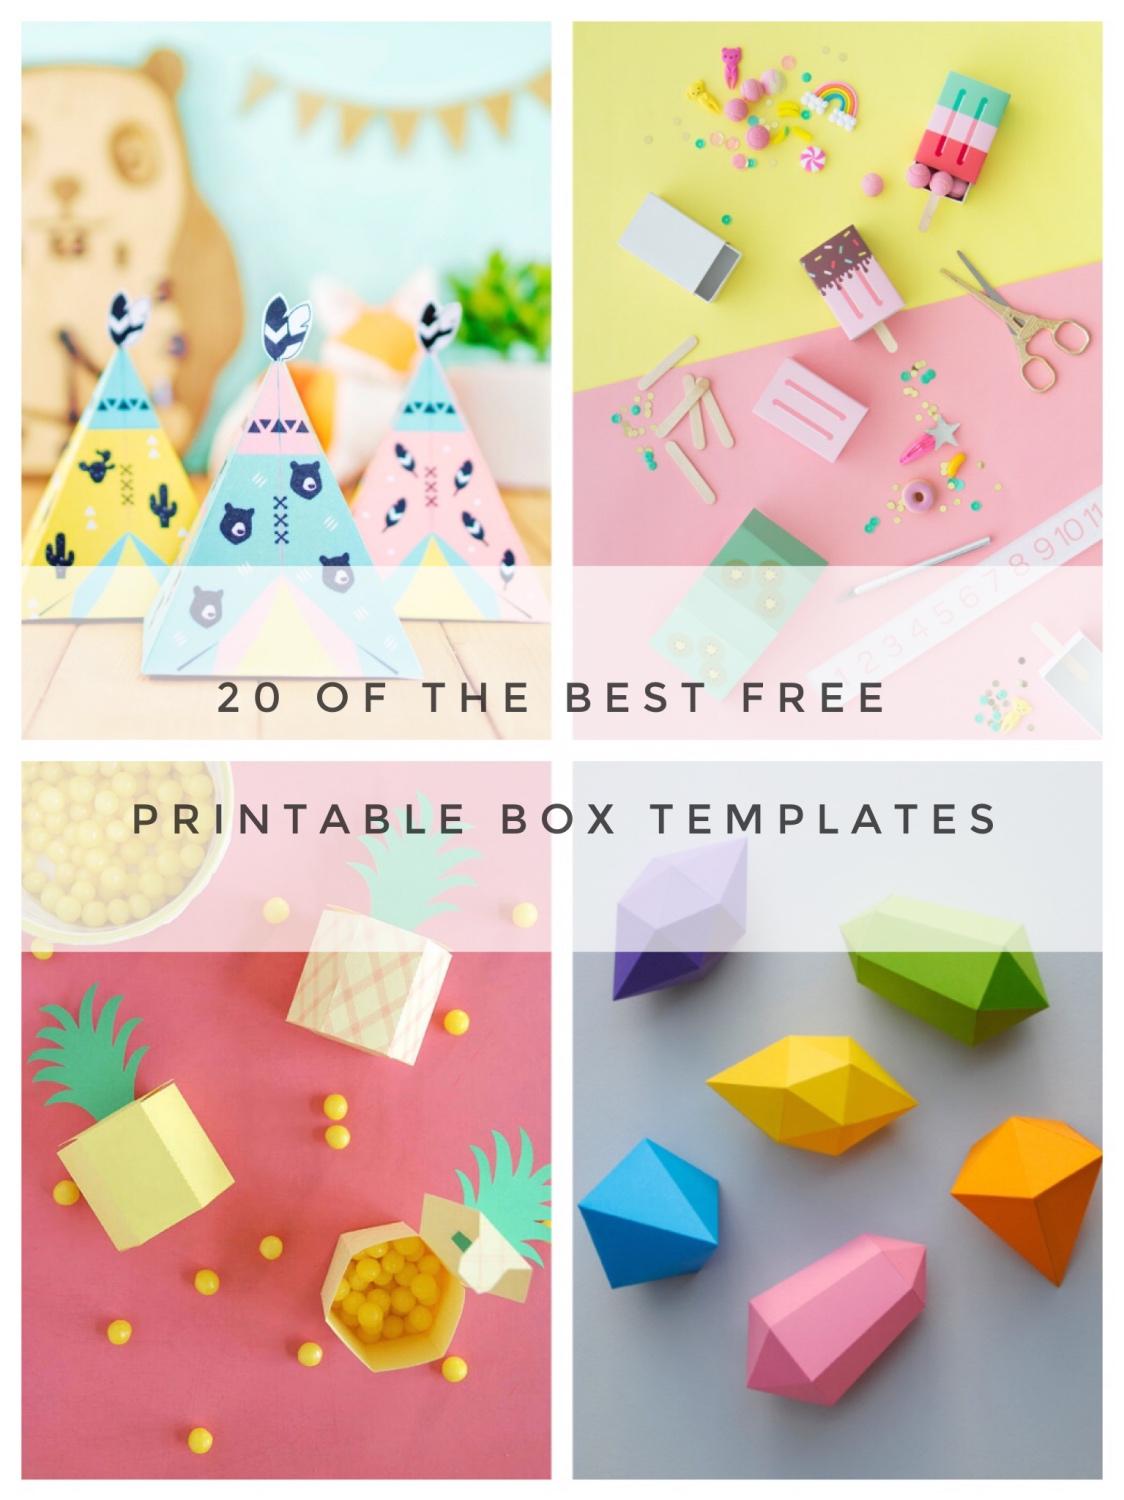 20 of The Best Free Printable Box Templates